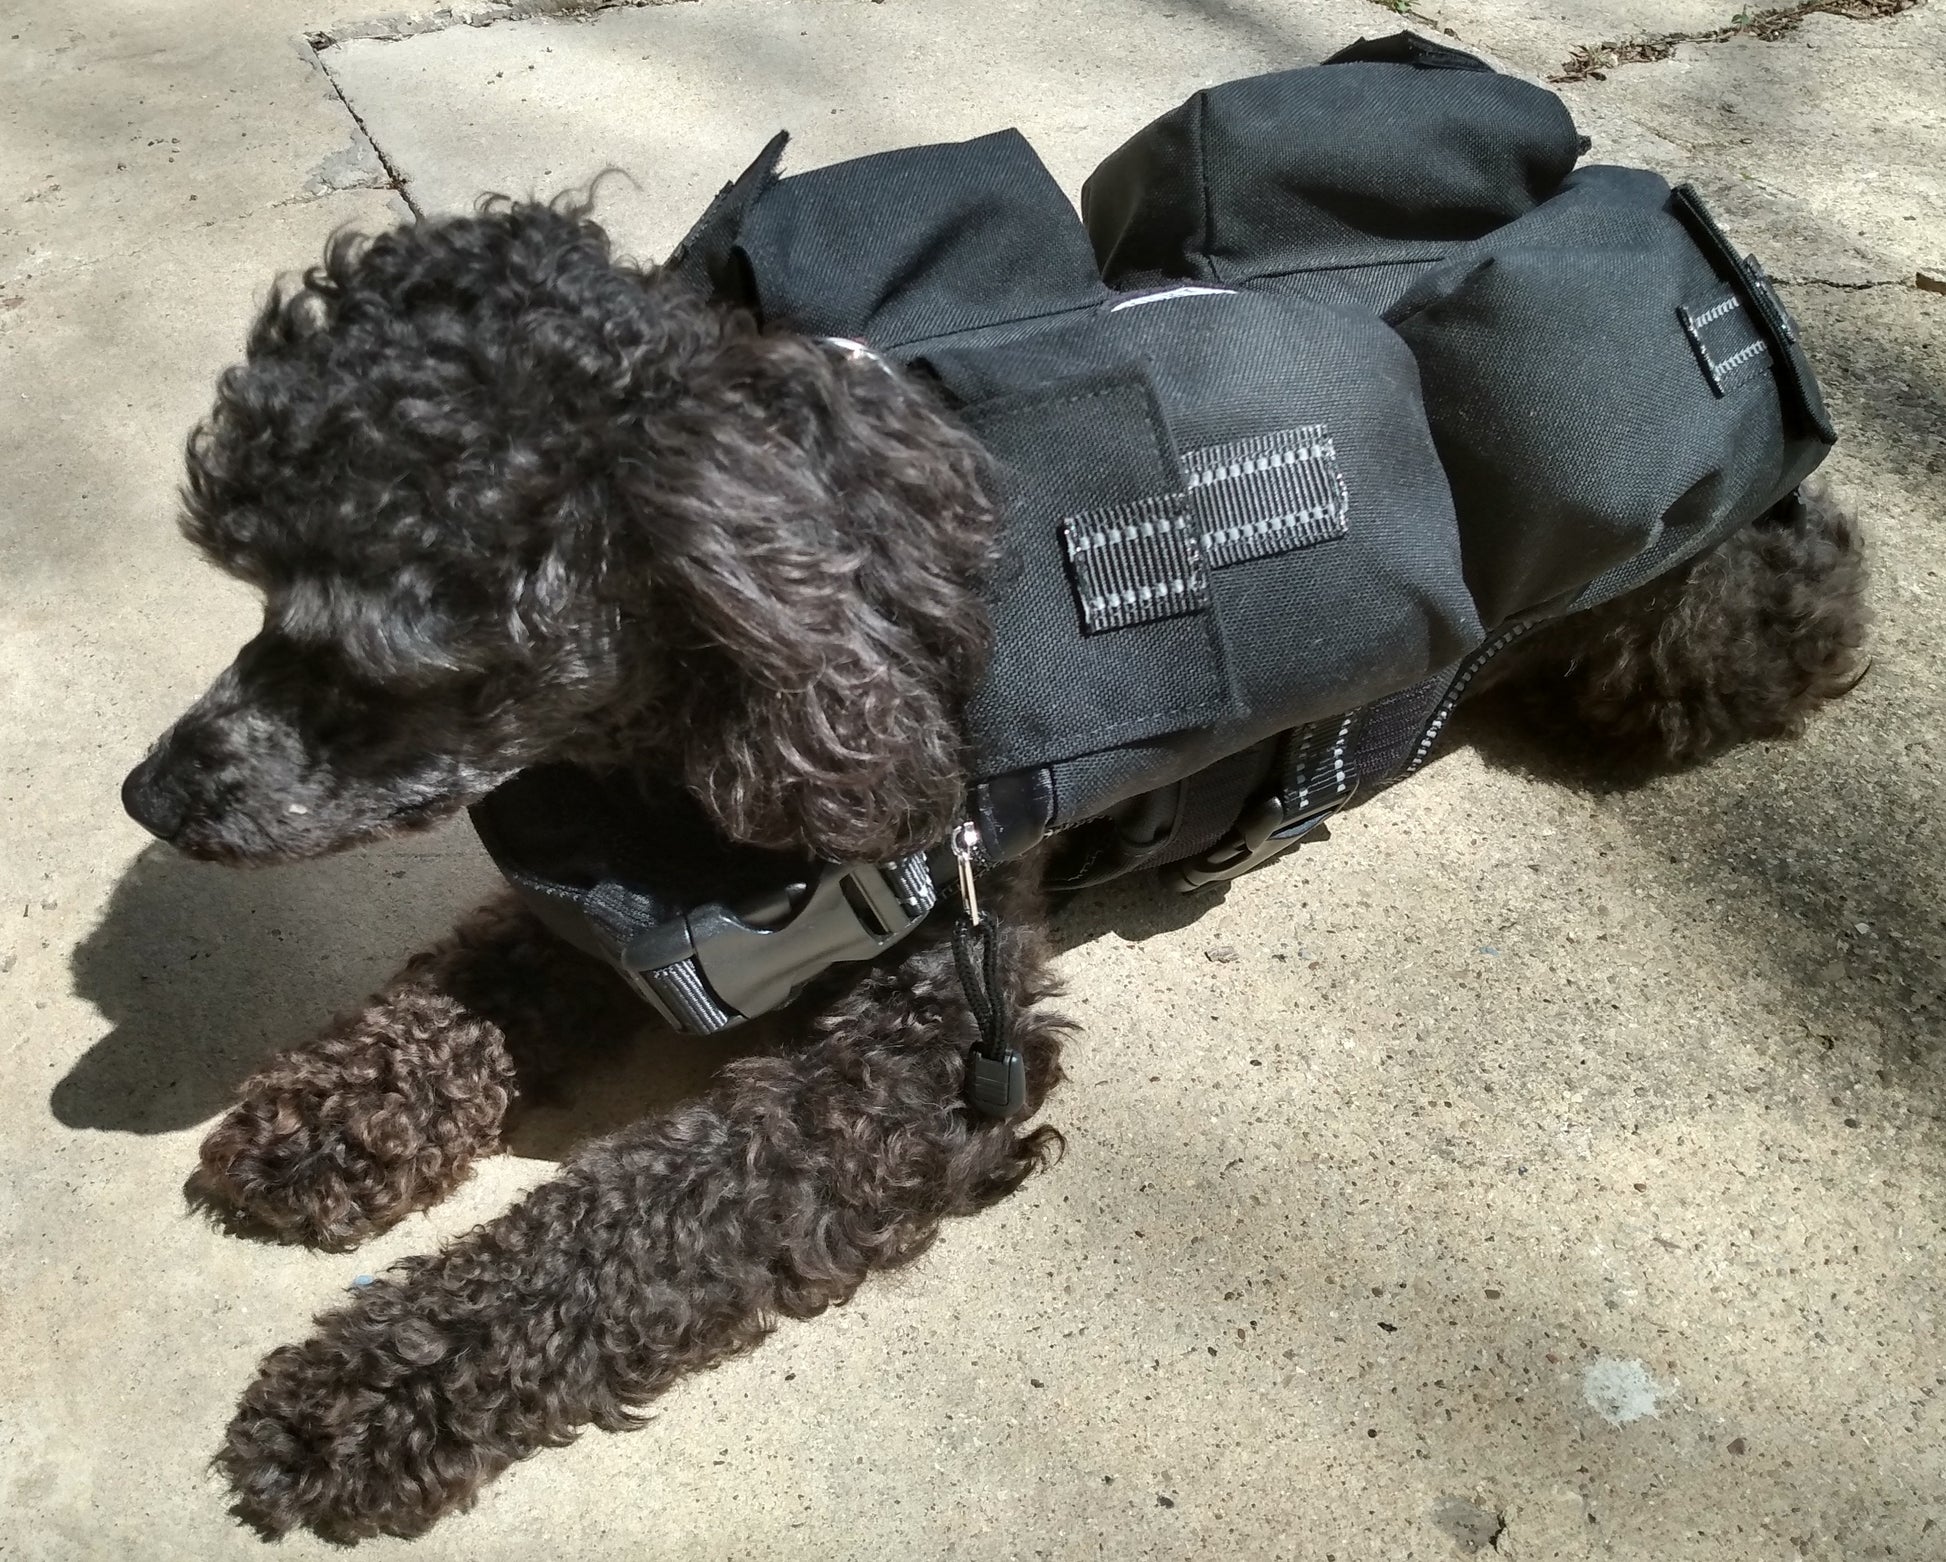 CWS Weighted Dog Vest + Flotation Vest - FREE Weight Bags - Small 10 Pounds